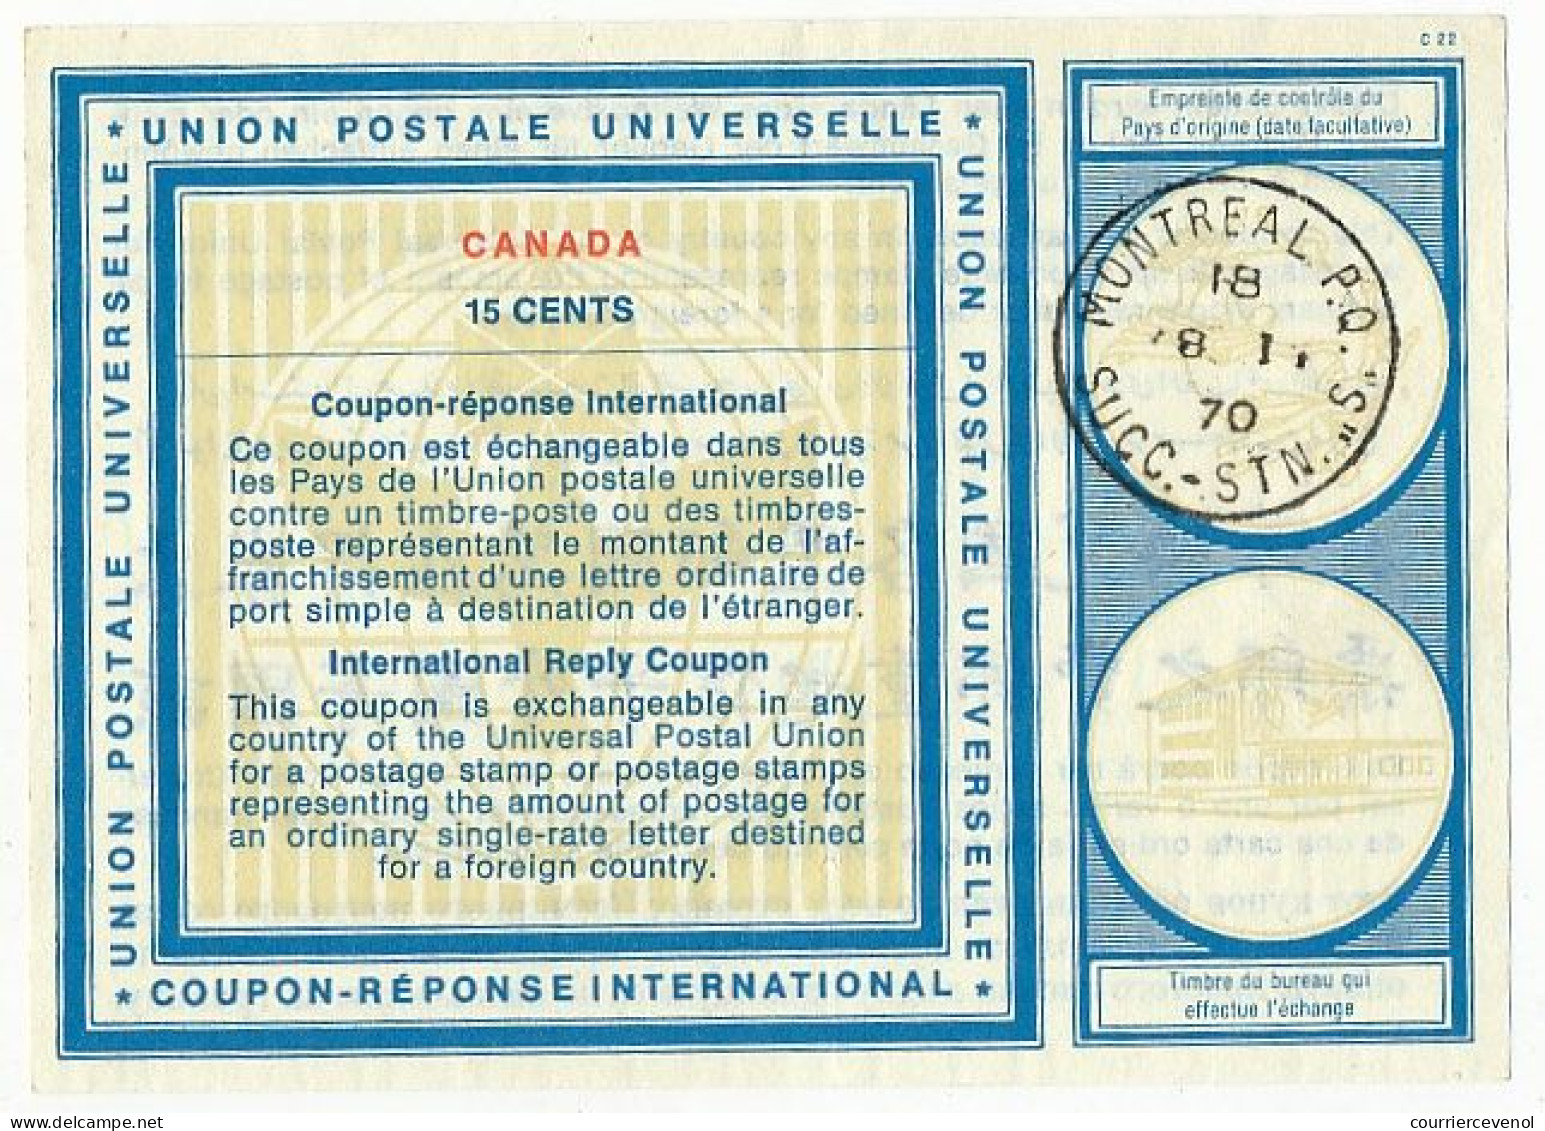 CANADA - COUPON REPONSE INTERNATIONAL. INTERNATIONAL REPLY COUPON. 15 CENTS. MONTREAL P.Q. - Antwortcoupons